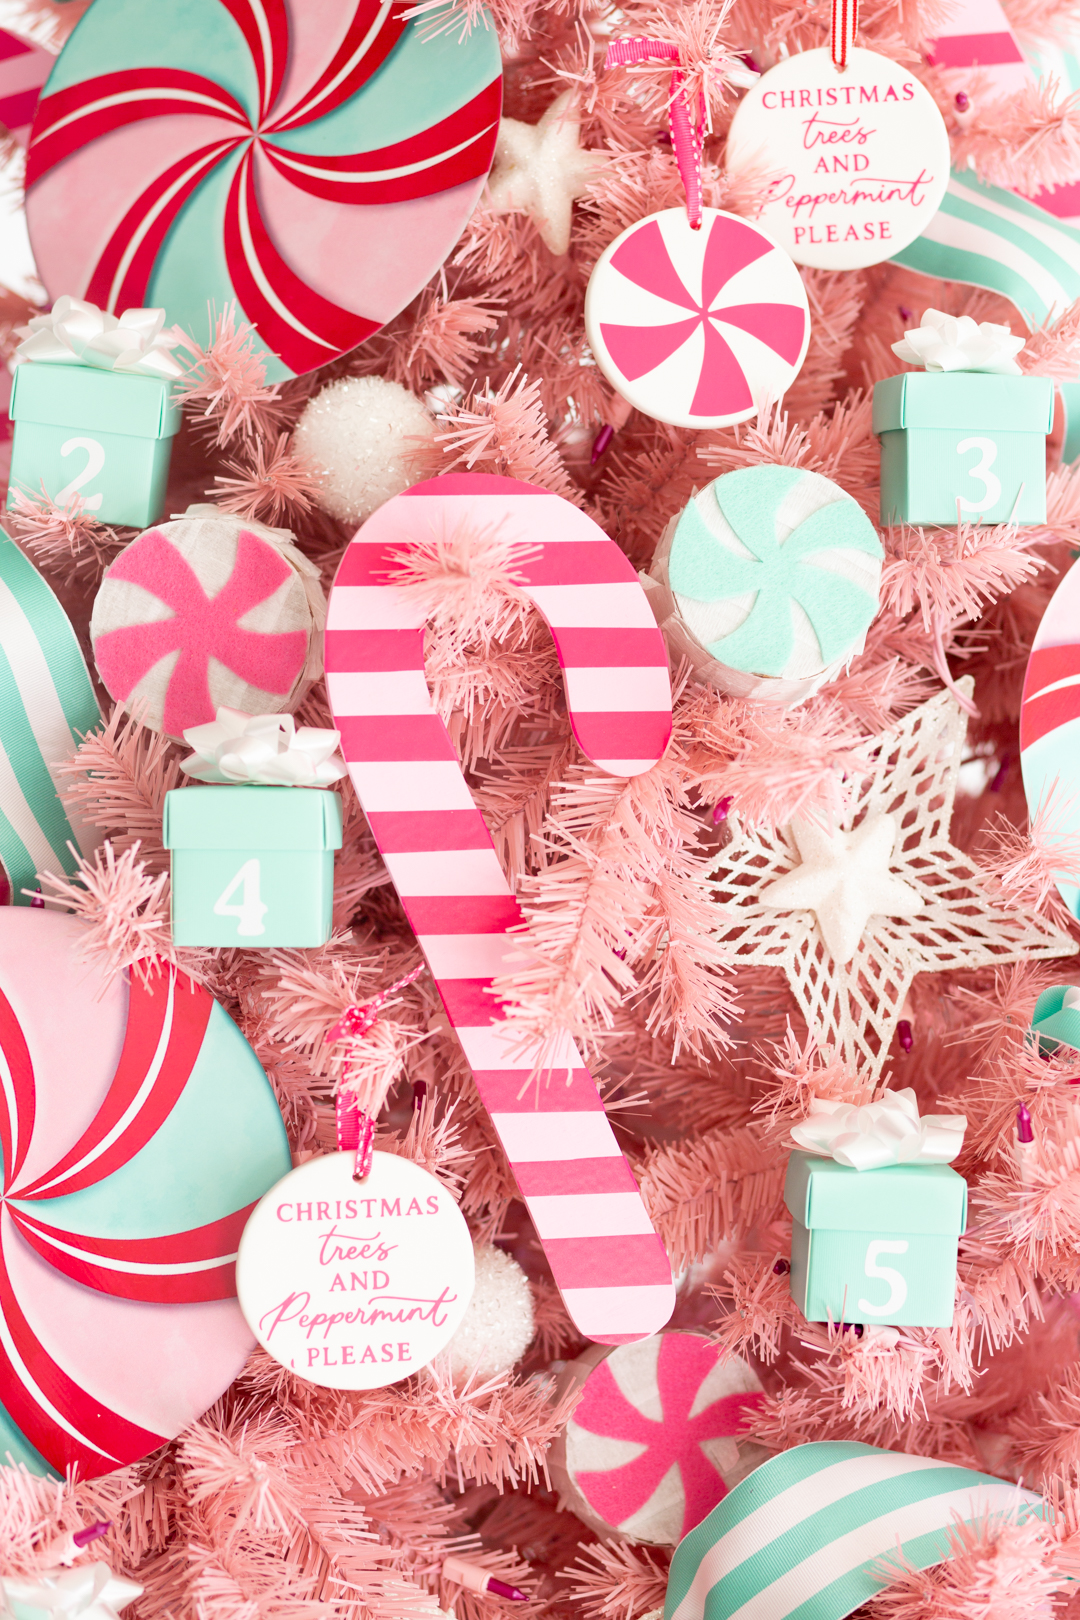 Pink Metal Christmas Tree Background Wallpaper Image For Free Download   Pngtree